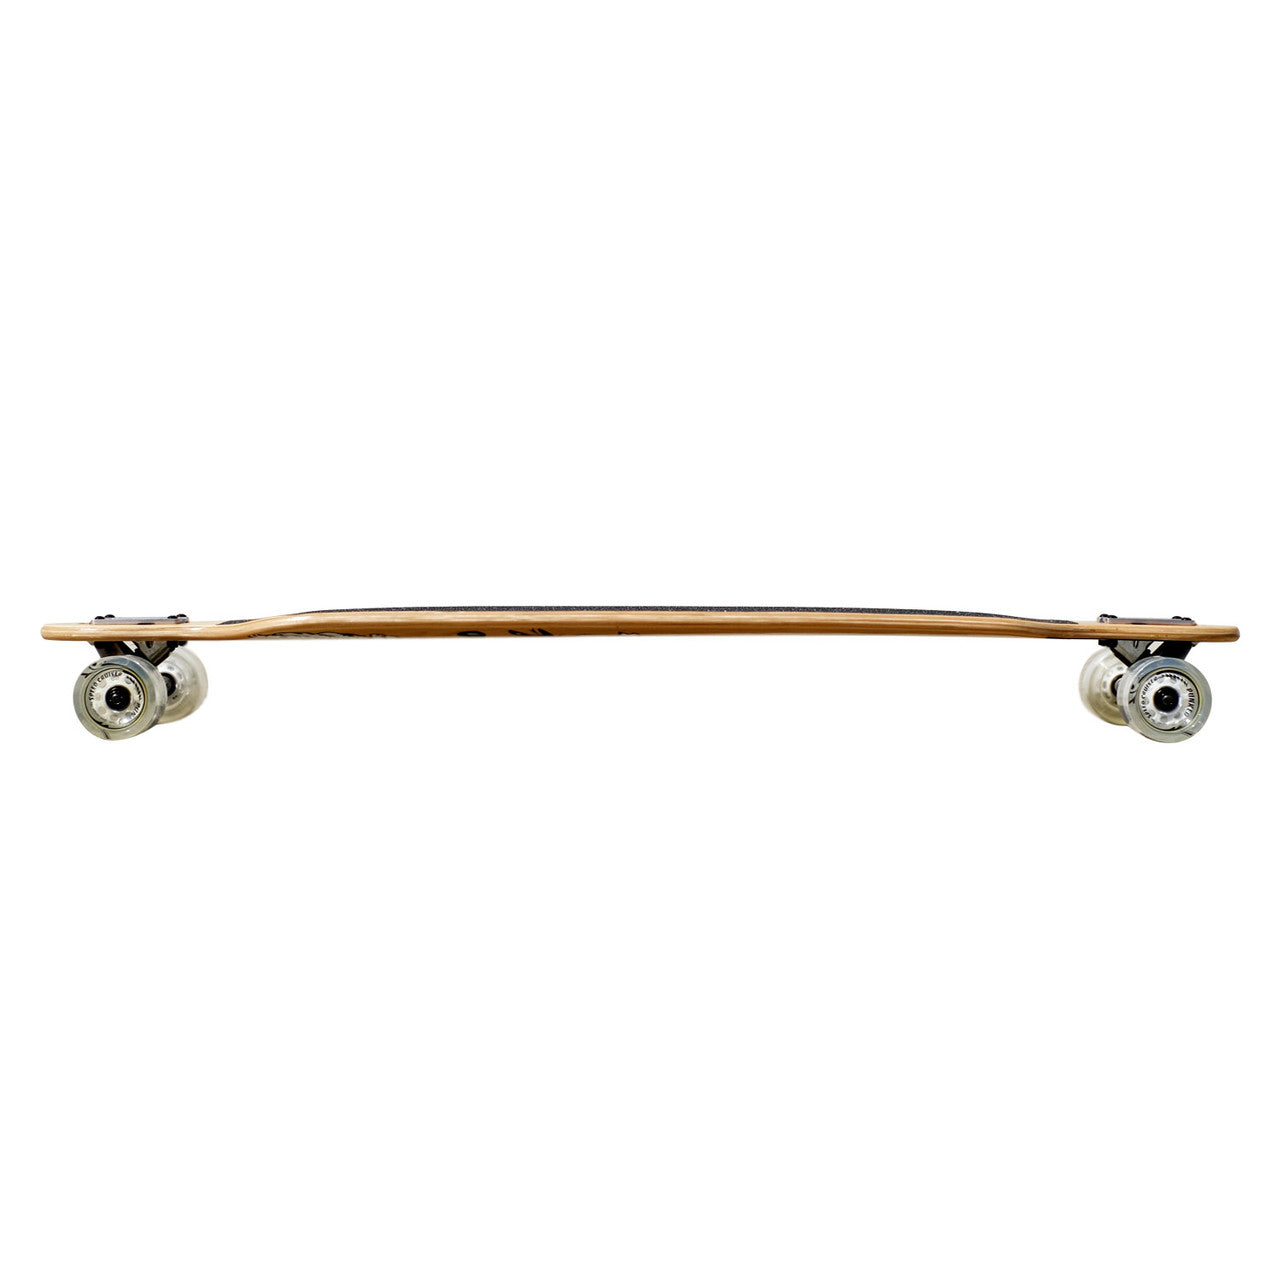 Yocaher Drop Through Longboard Complete - Earth Series - Mountain